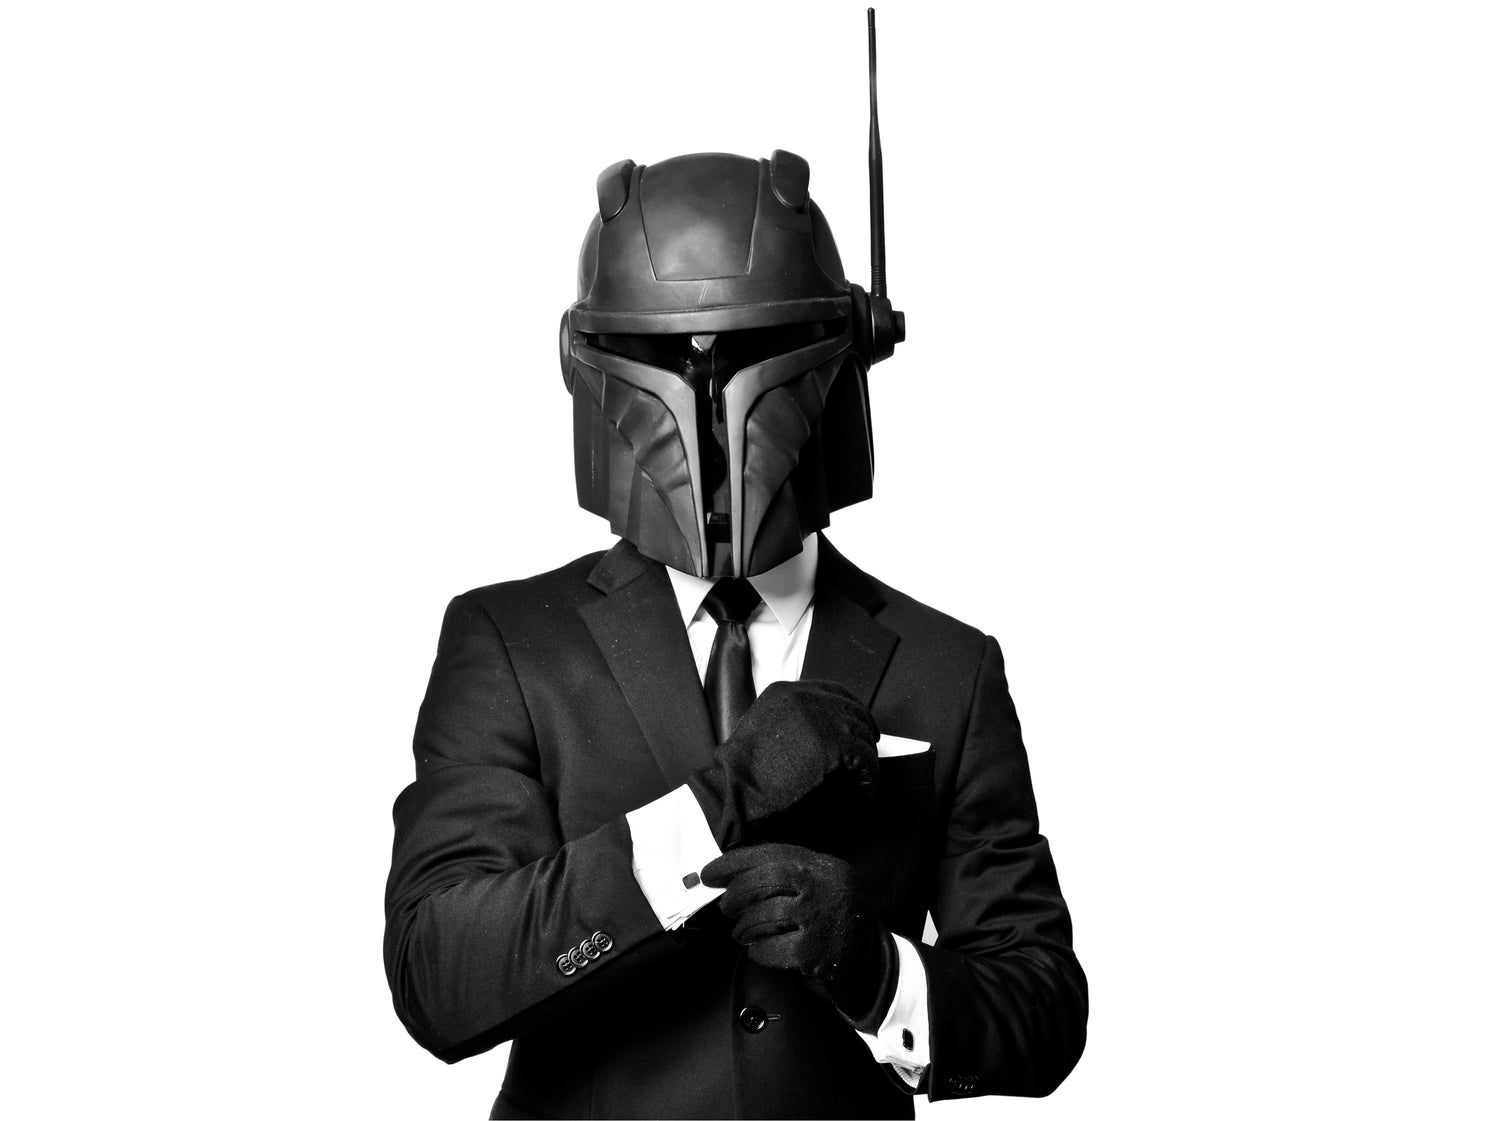 At the Iron Forge we create works of art, both wearable and displayable, specializing in Star Wars Mandalorian helmets.